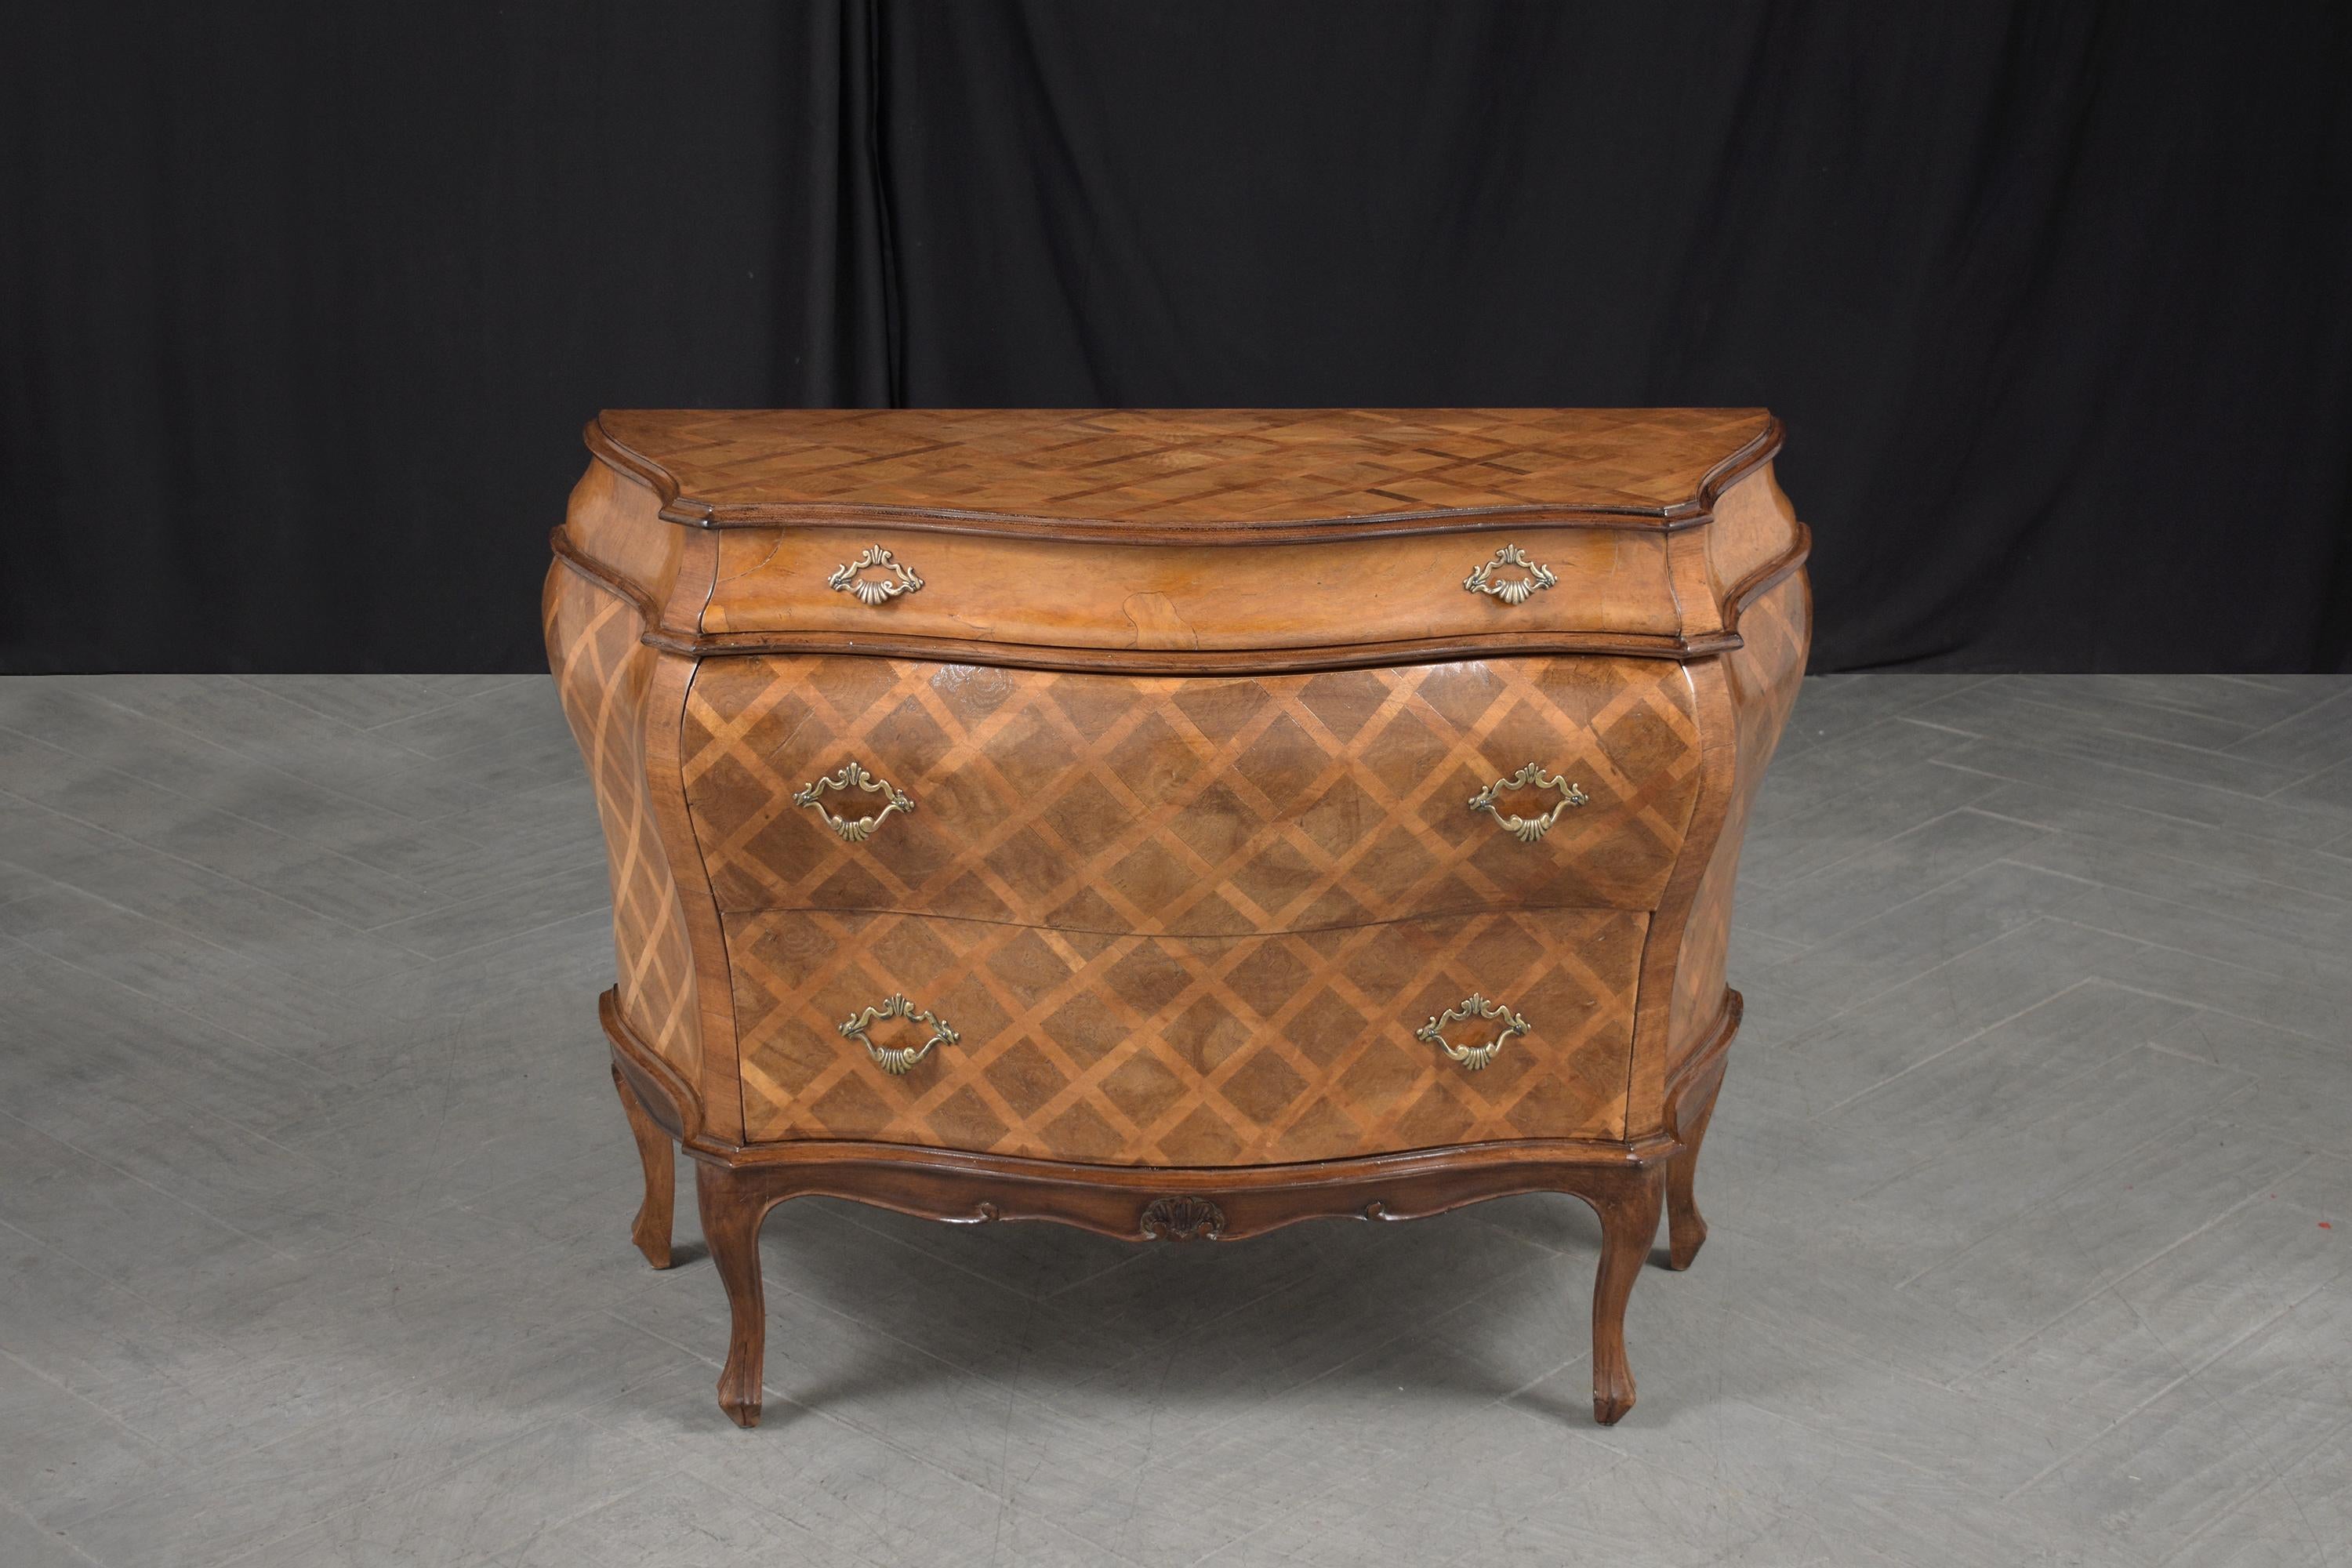 Italian Vintage Commode: Restored Wood and Marquetry Veneer Bombay Chest 1